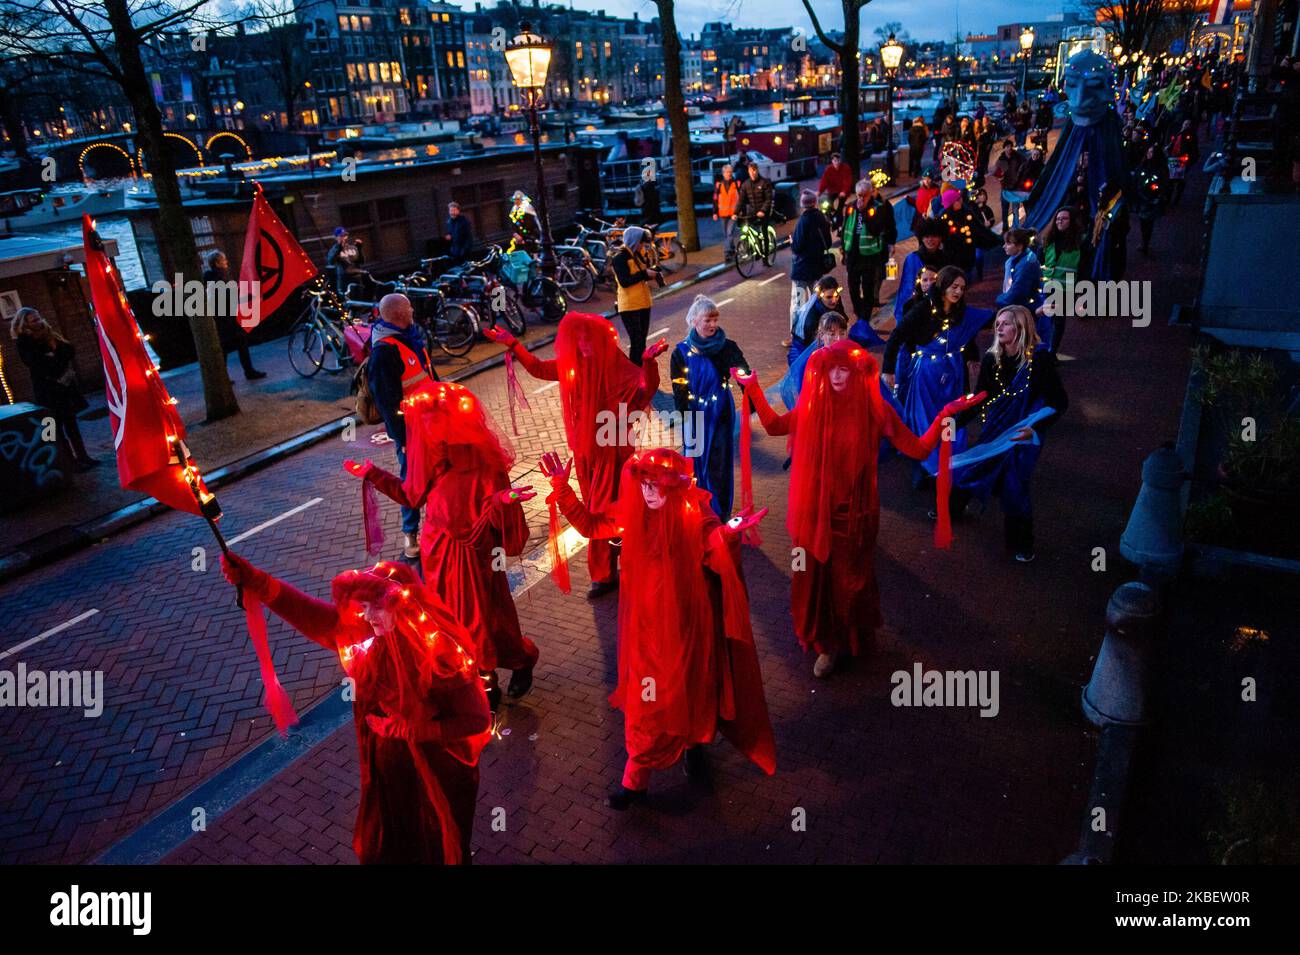 Extinction Rebellion activists are walking behind the Red Rebel Brigade during the Extinction Rebellion artistic march, in Amsterdam, on January 18th, 2020 (Photo by Romy Arroyo Fernandez/NurPhoto) Stock Photo